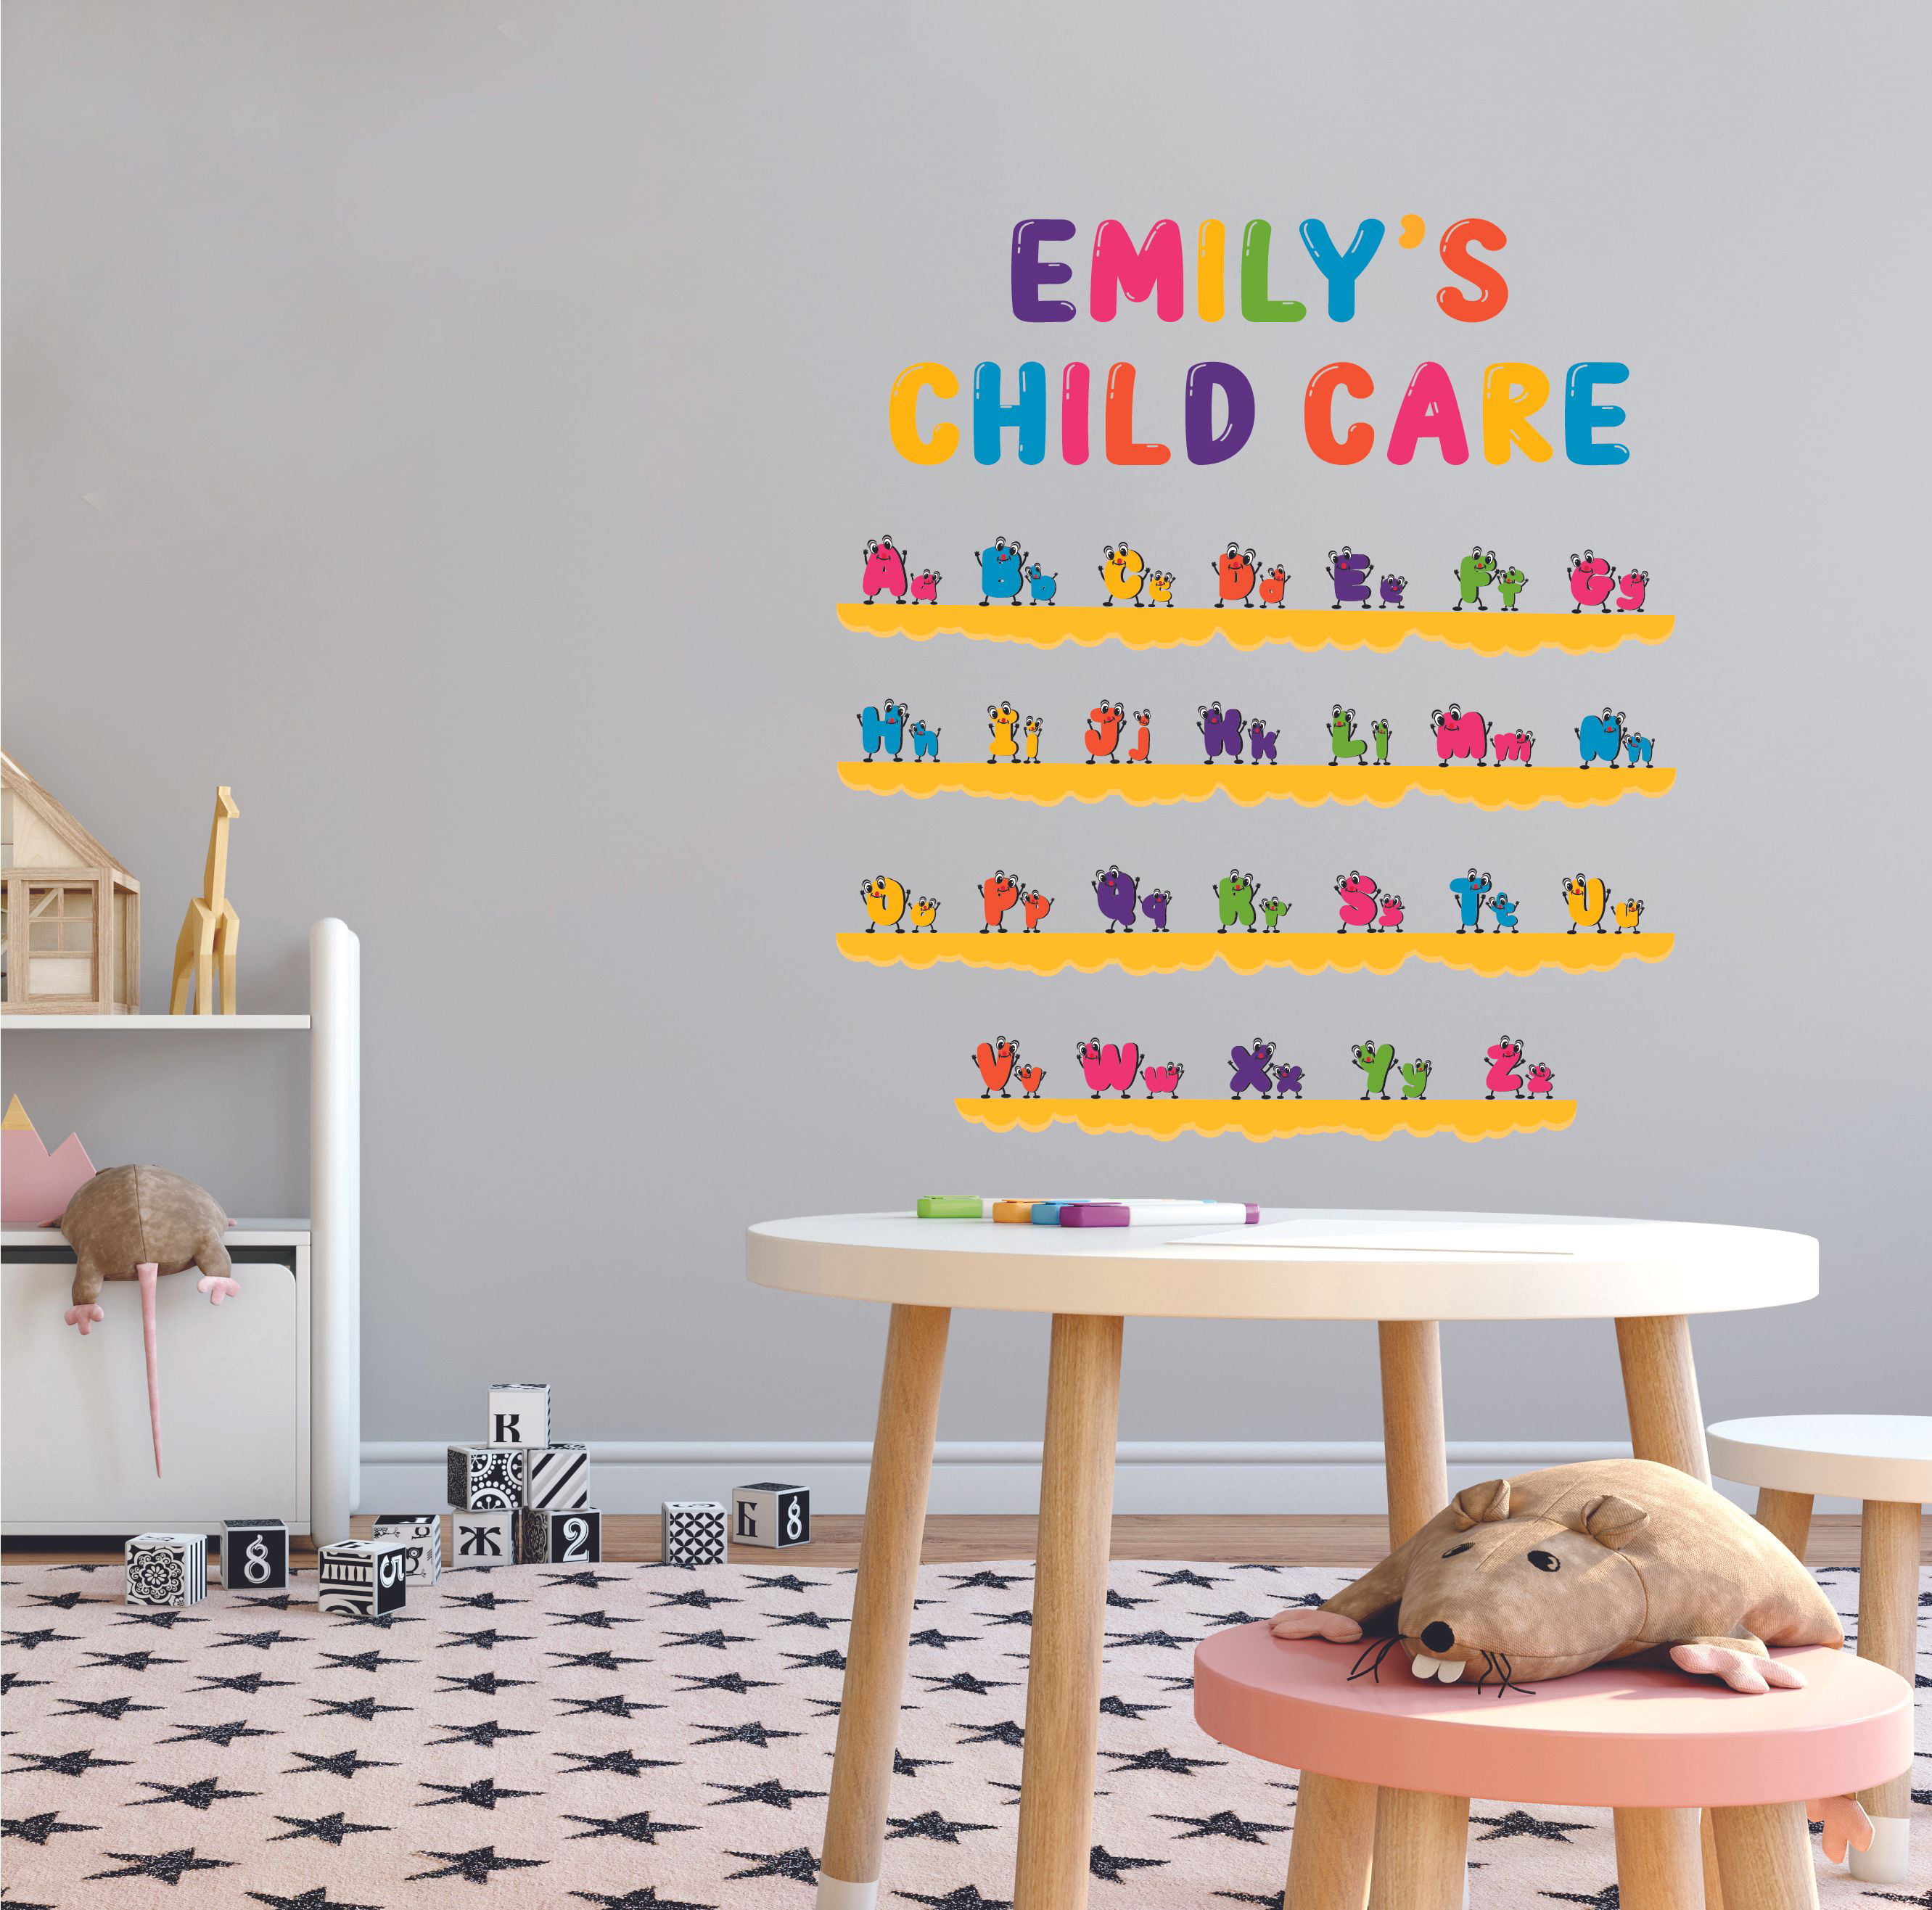 KidzFun Alphabet Wall Decals Learn ABCs Easily With Puzzle Design & Cartoon  Art Educational & Aesthetic Home Decor From Cong09, $9.94